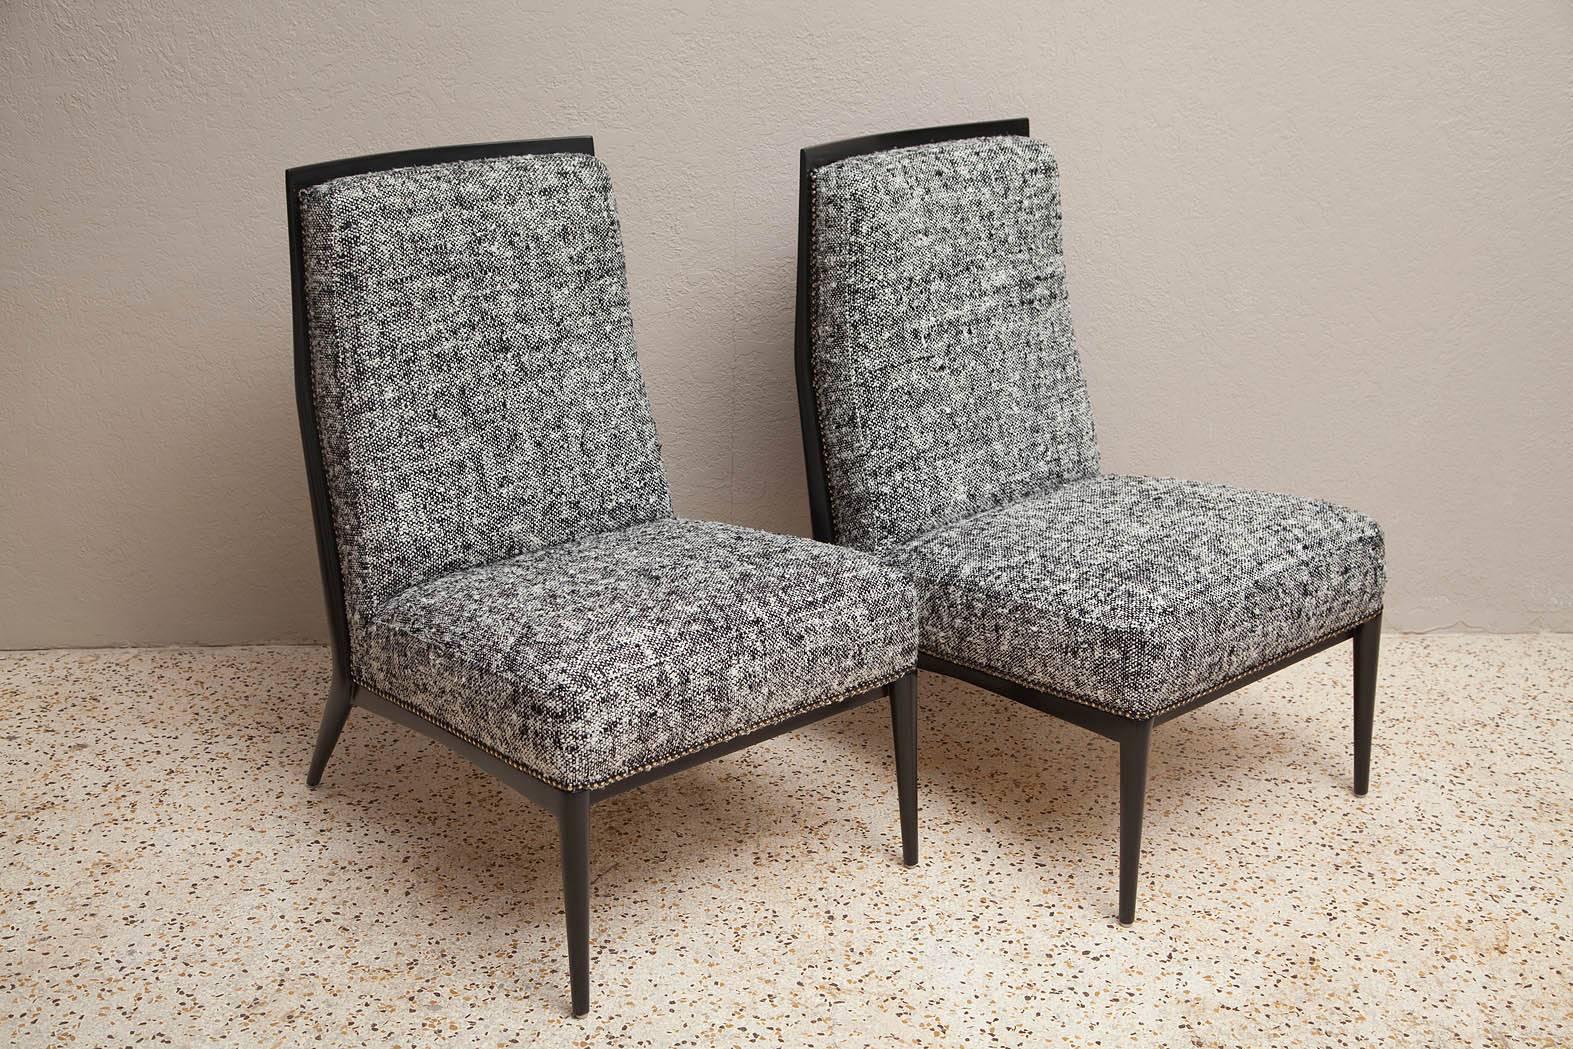 Professionally restored 1950's slipper chairs by Paul McCobb have ebonized walnut frames, upholstered in a thick salt-and-pepper raw silk tweed with nail head trim.